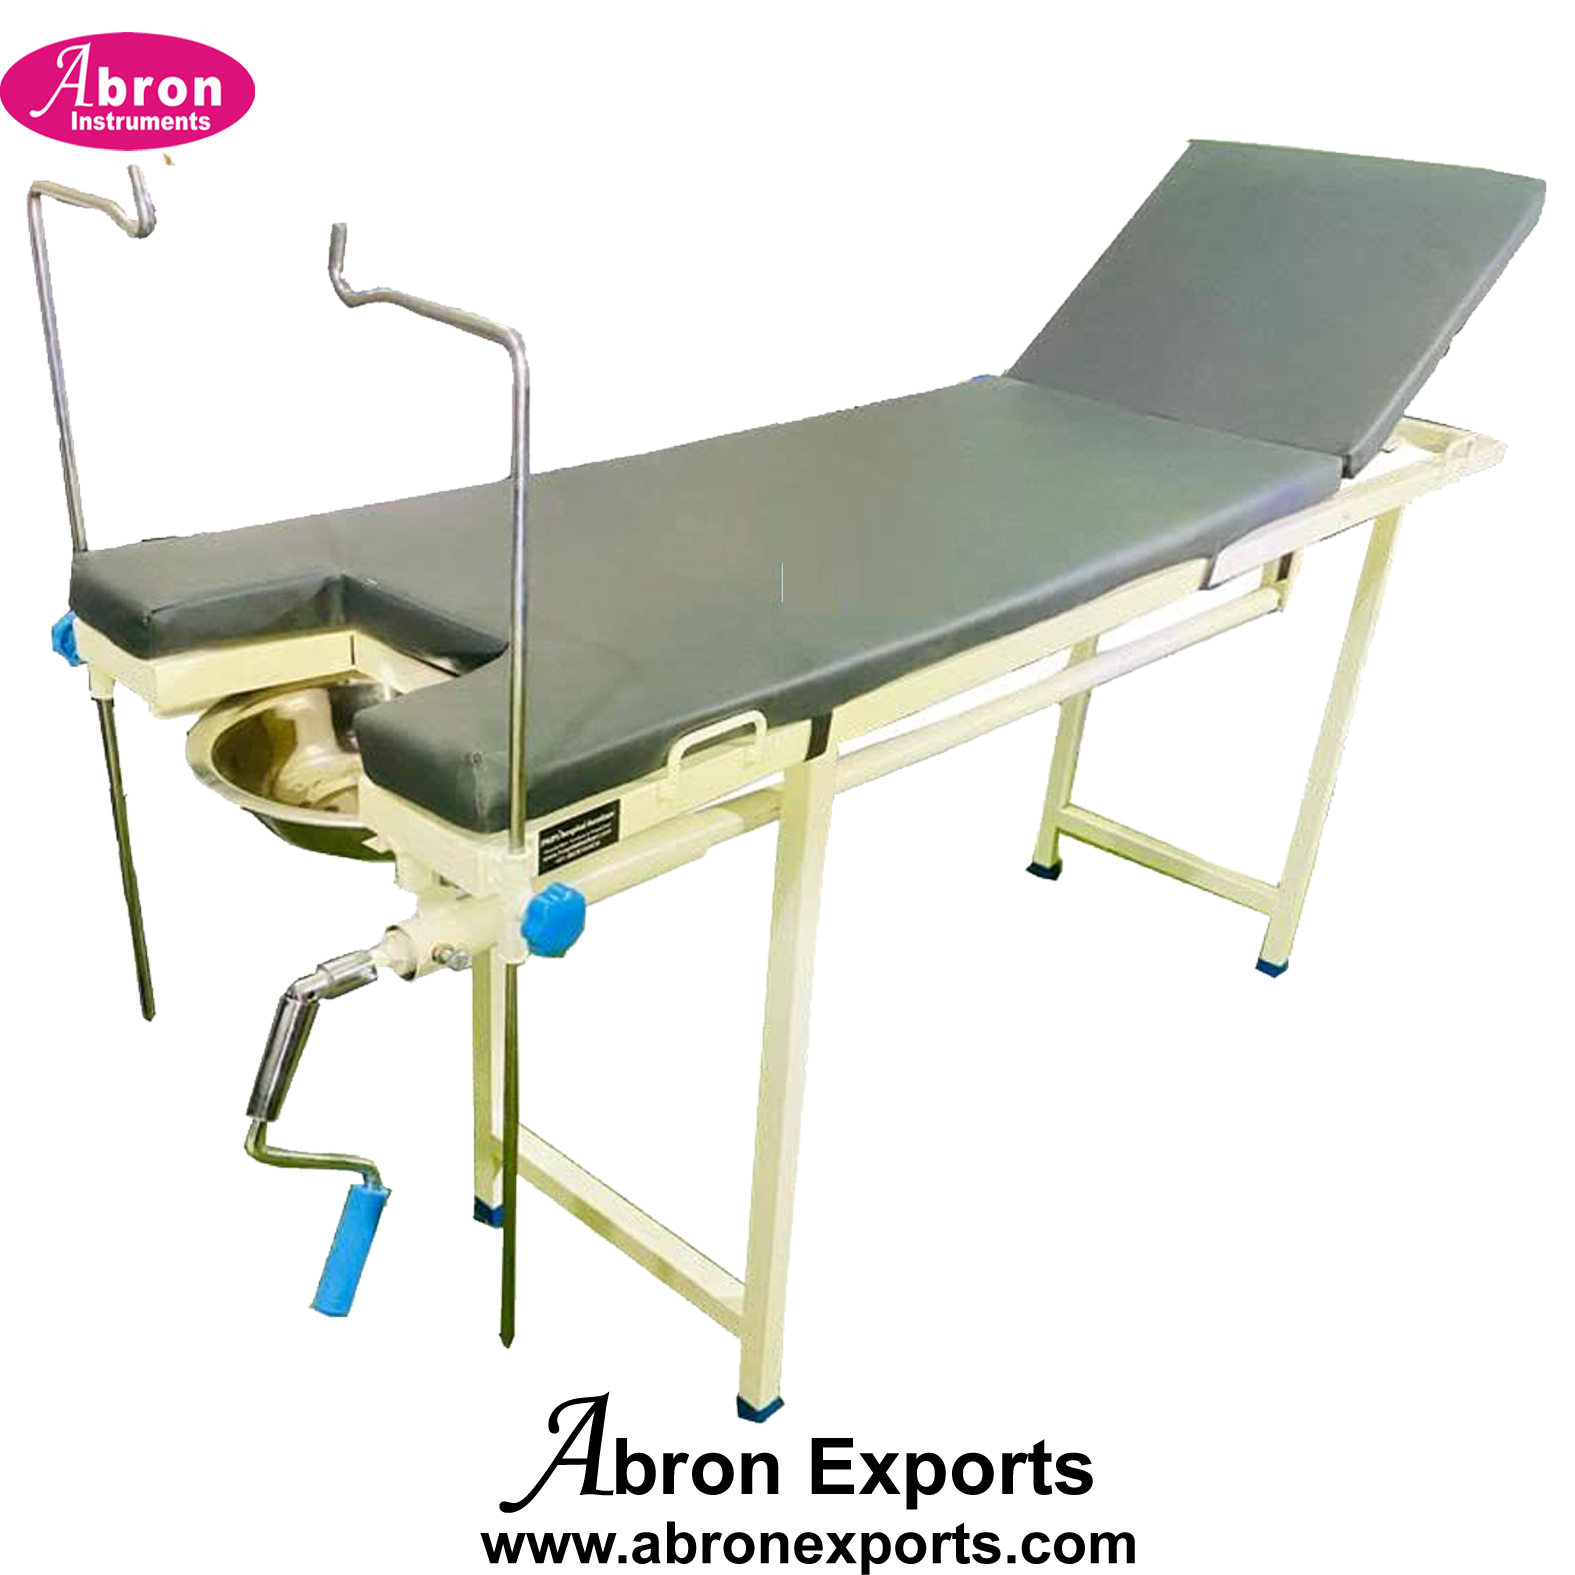 Gynecological Obstetric Delivery Examination Table Bed Labour Legs Bars Support Matters Abron ABM-2714GYEX 